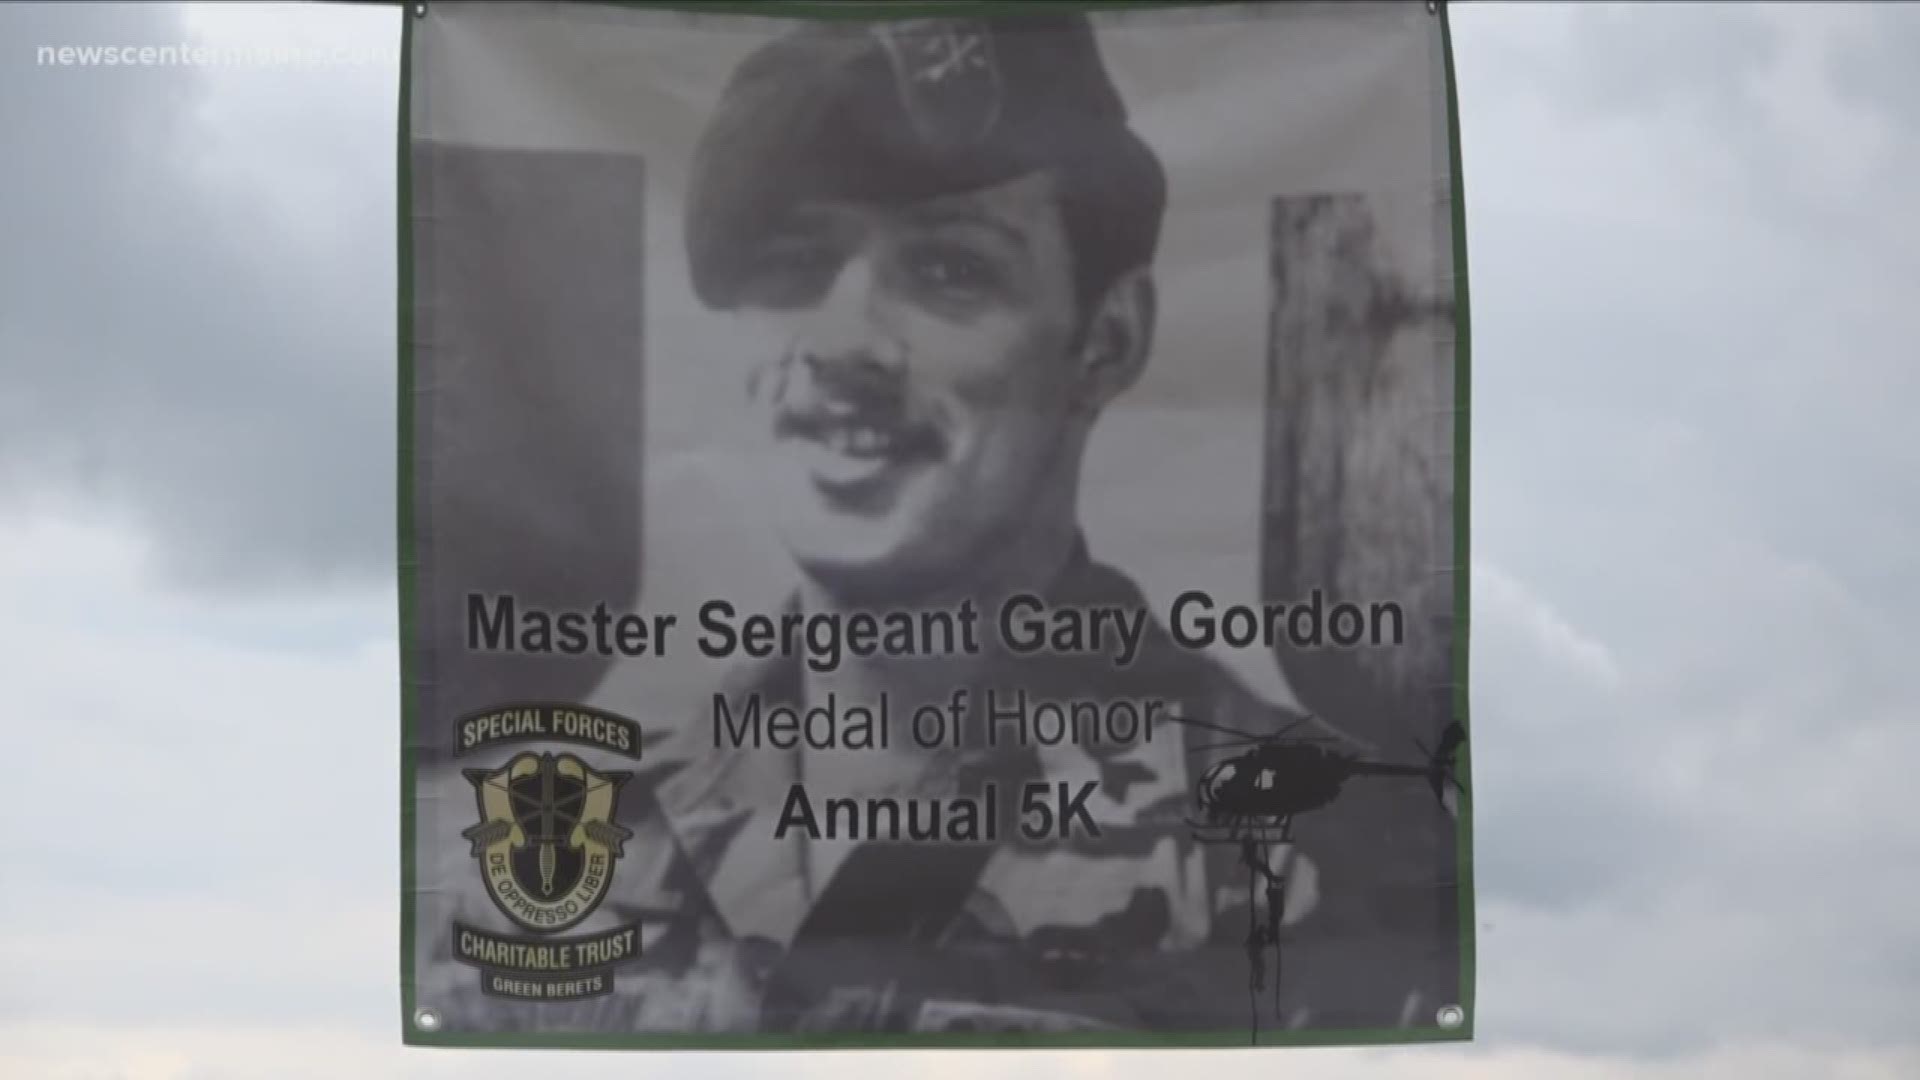 The town of Lincoln honors Master Sergeant Gary Gordon who gave the ultimate sacrifice and died a hero.